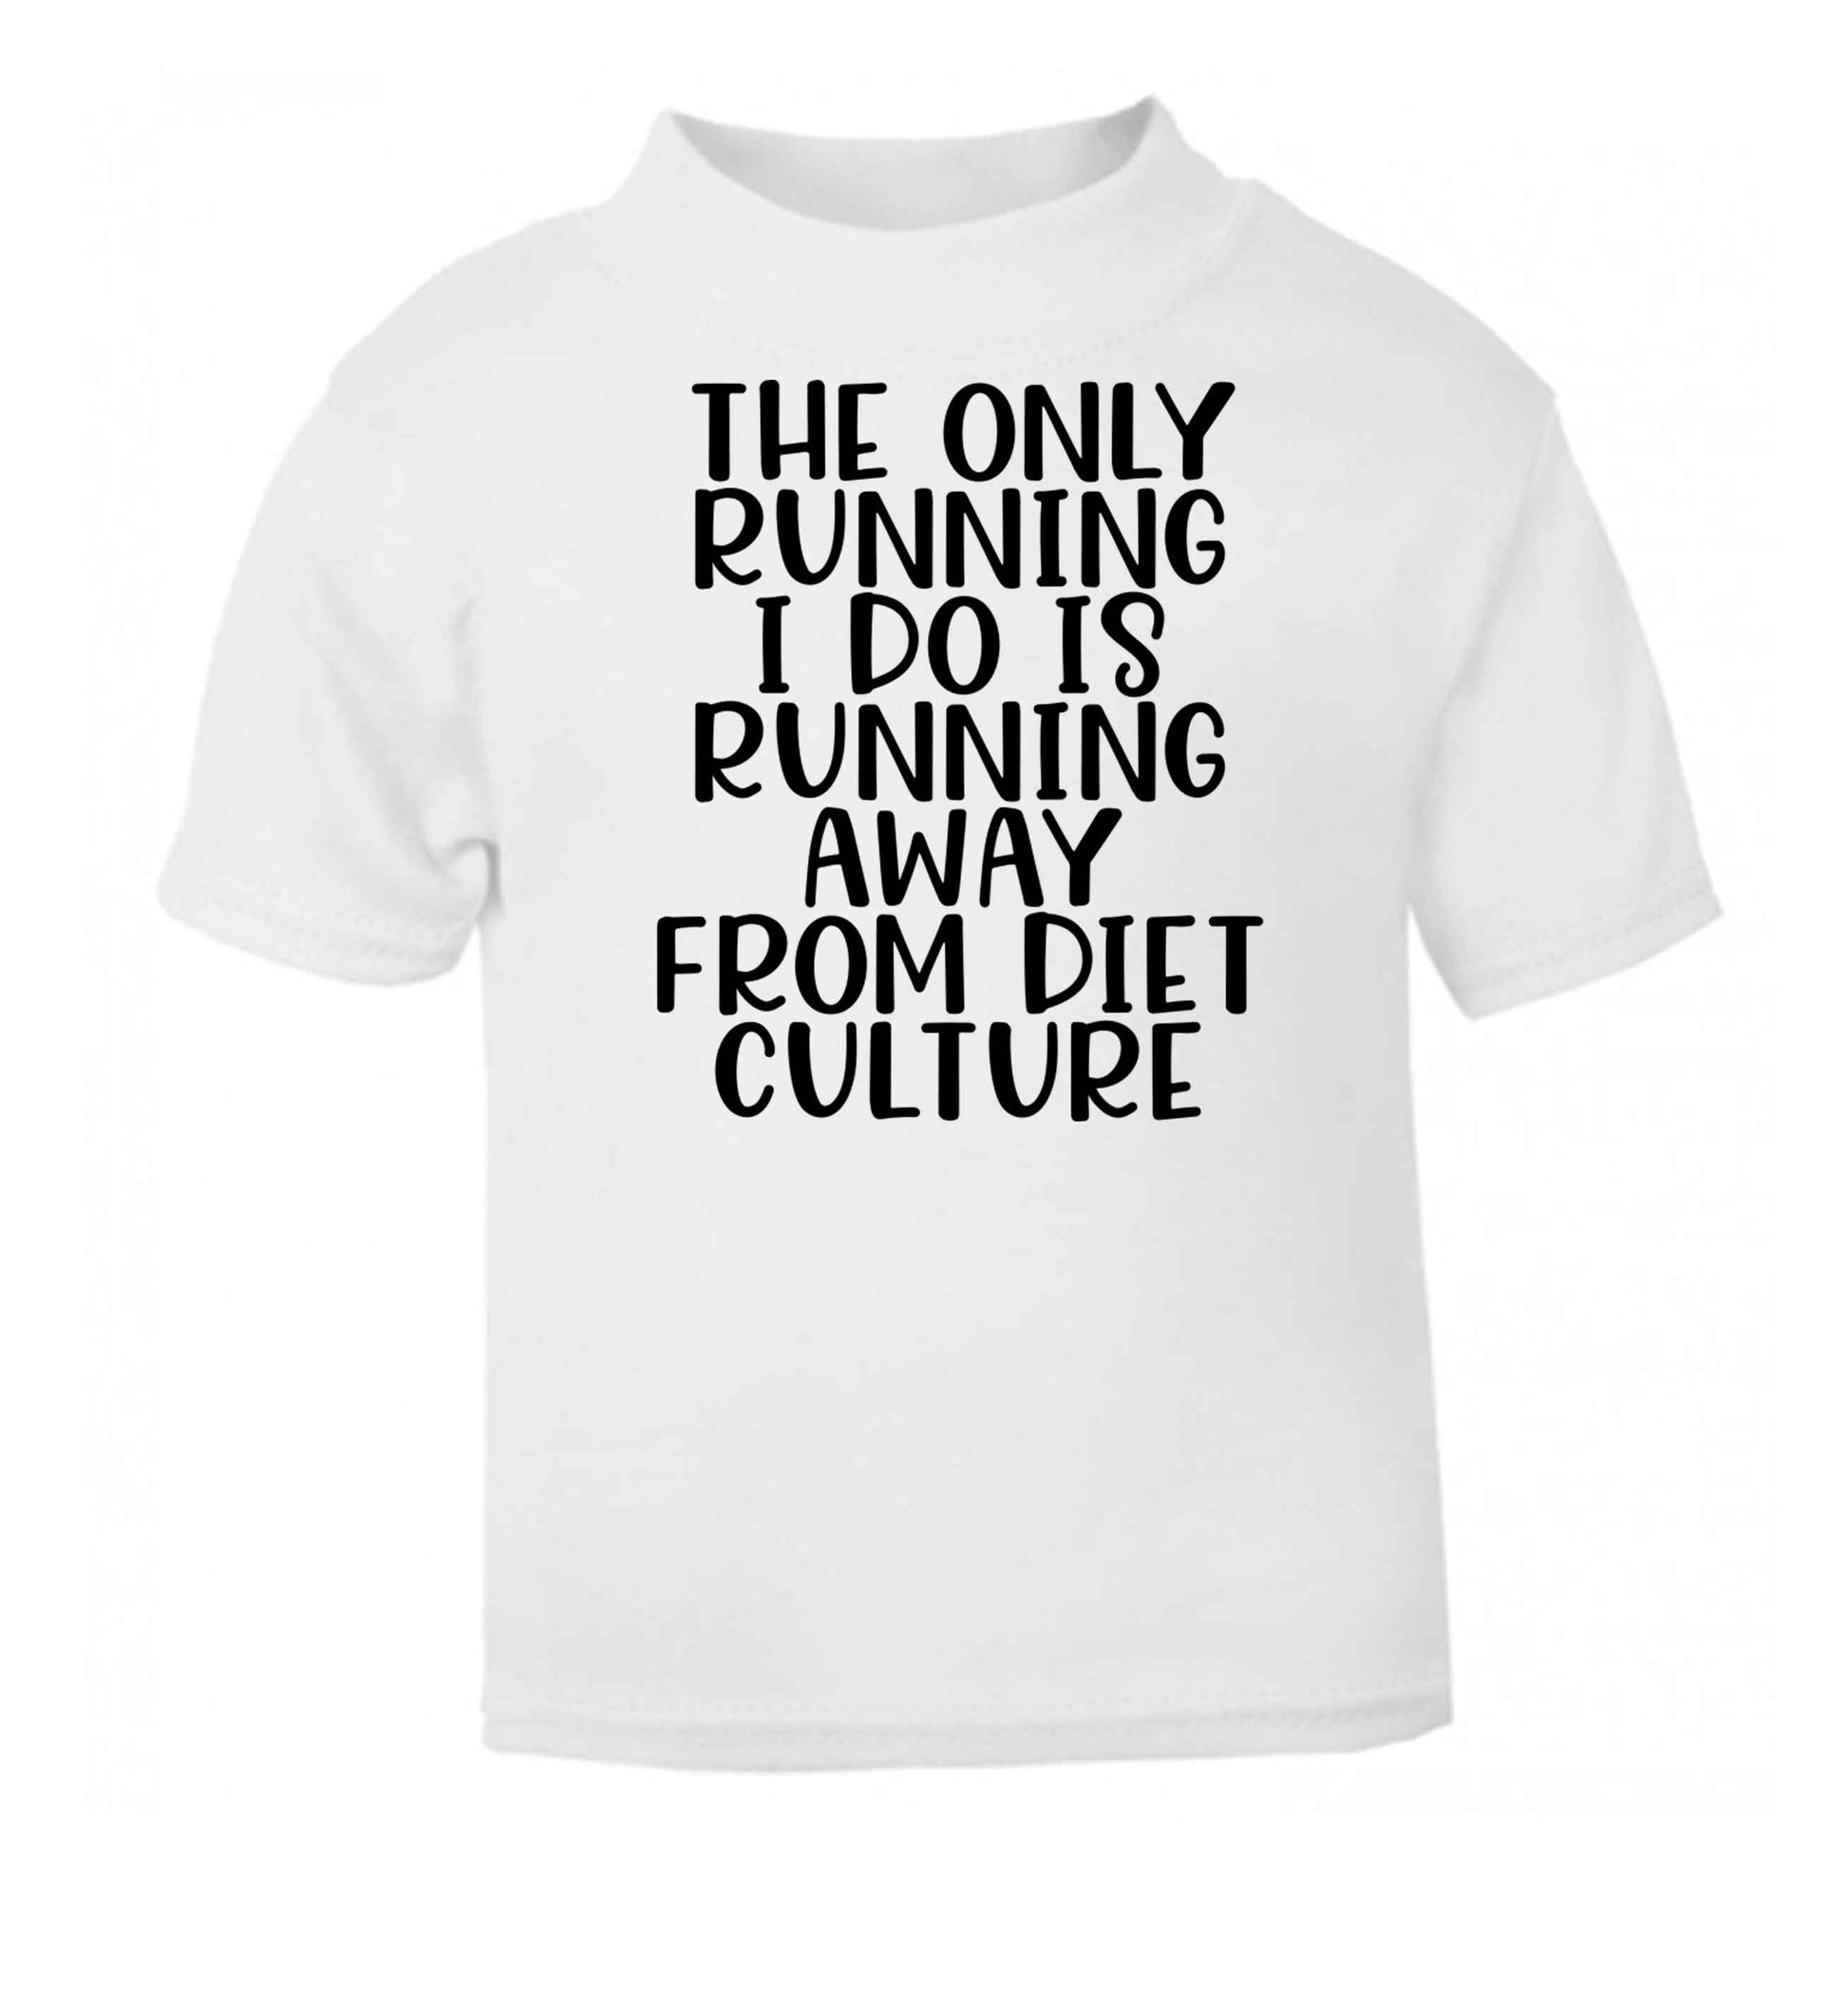 The only running I do is running away from diet culture white baby toddler Tshirt 2 Years